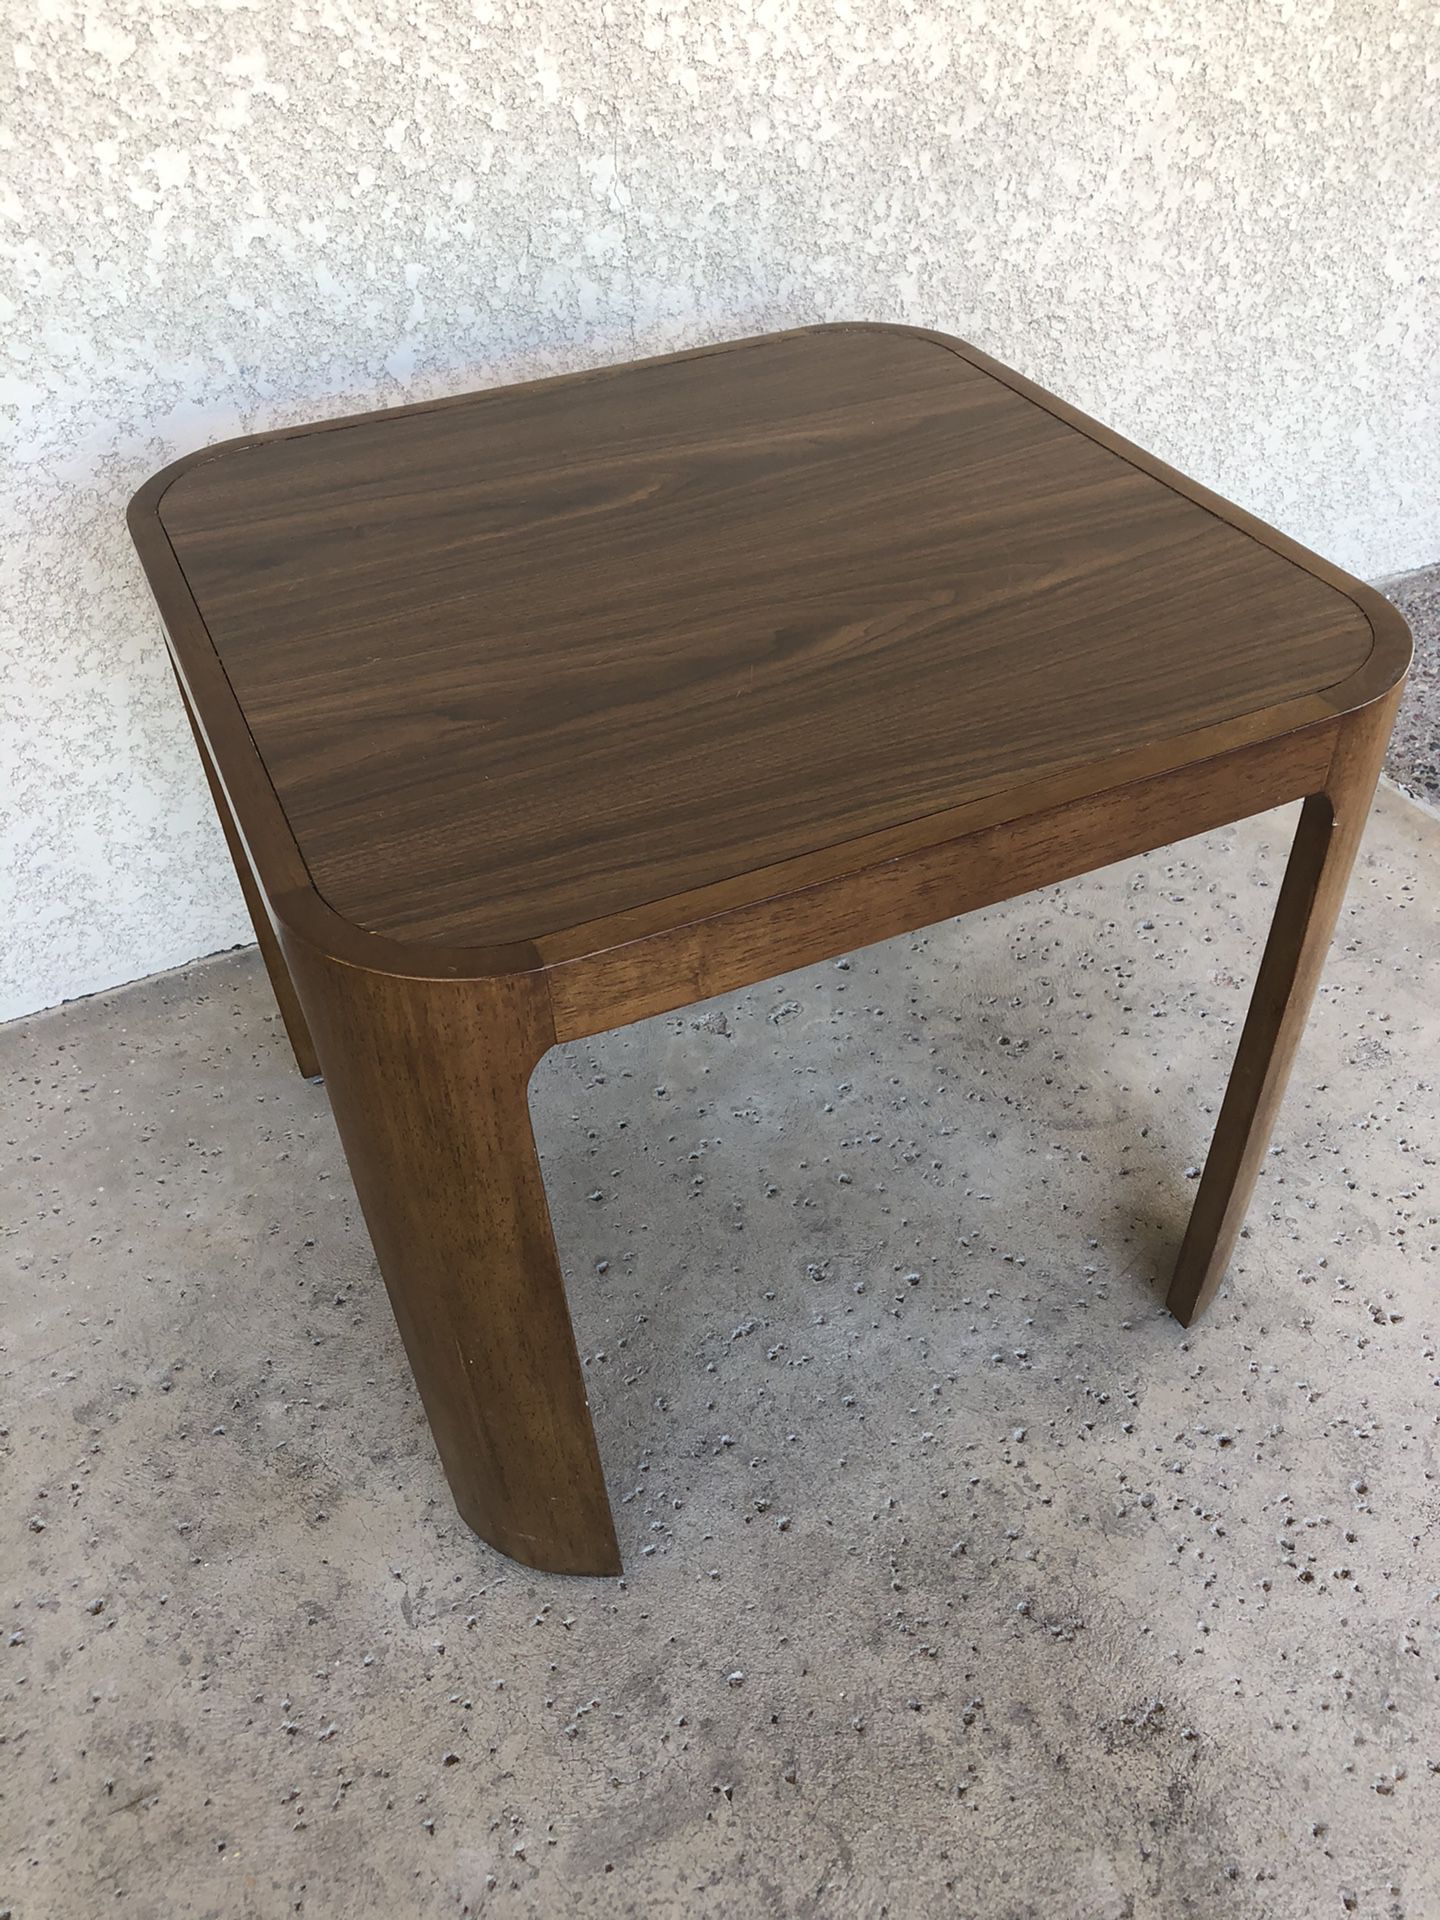 Modern wood and formica end table